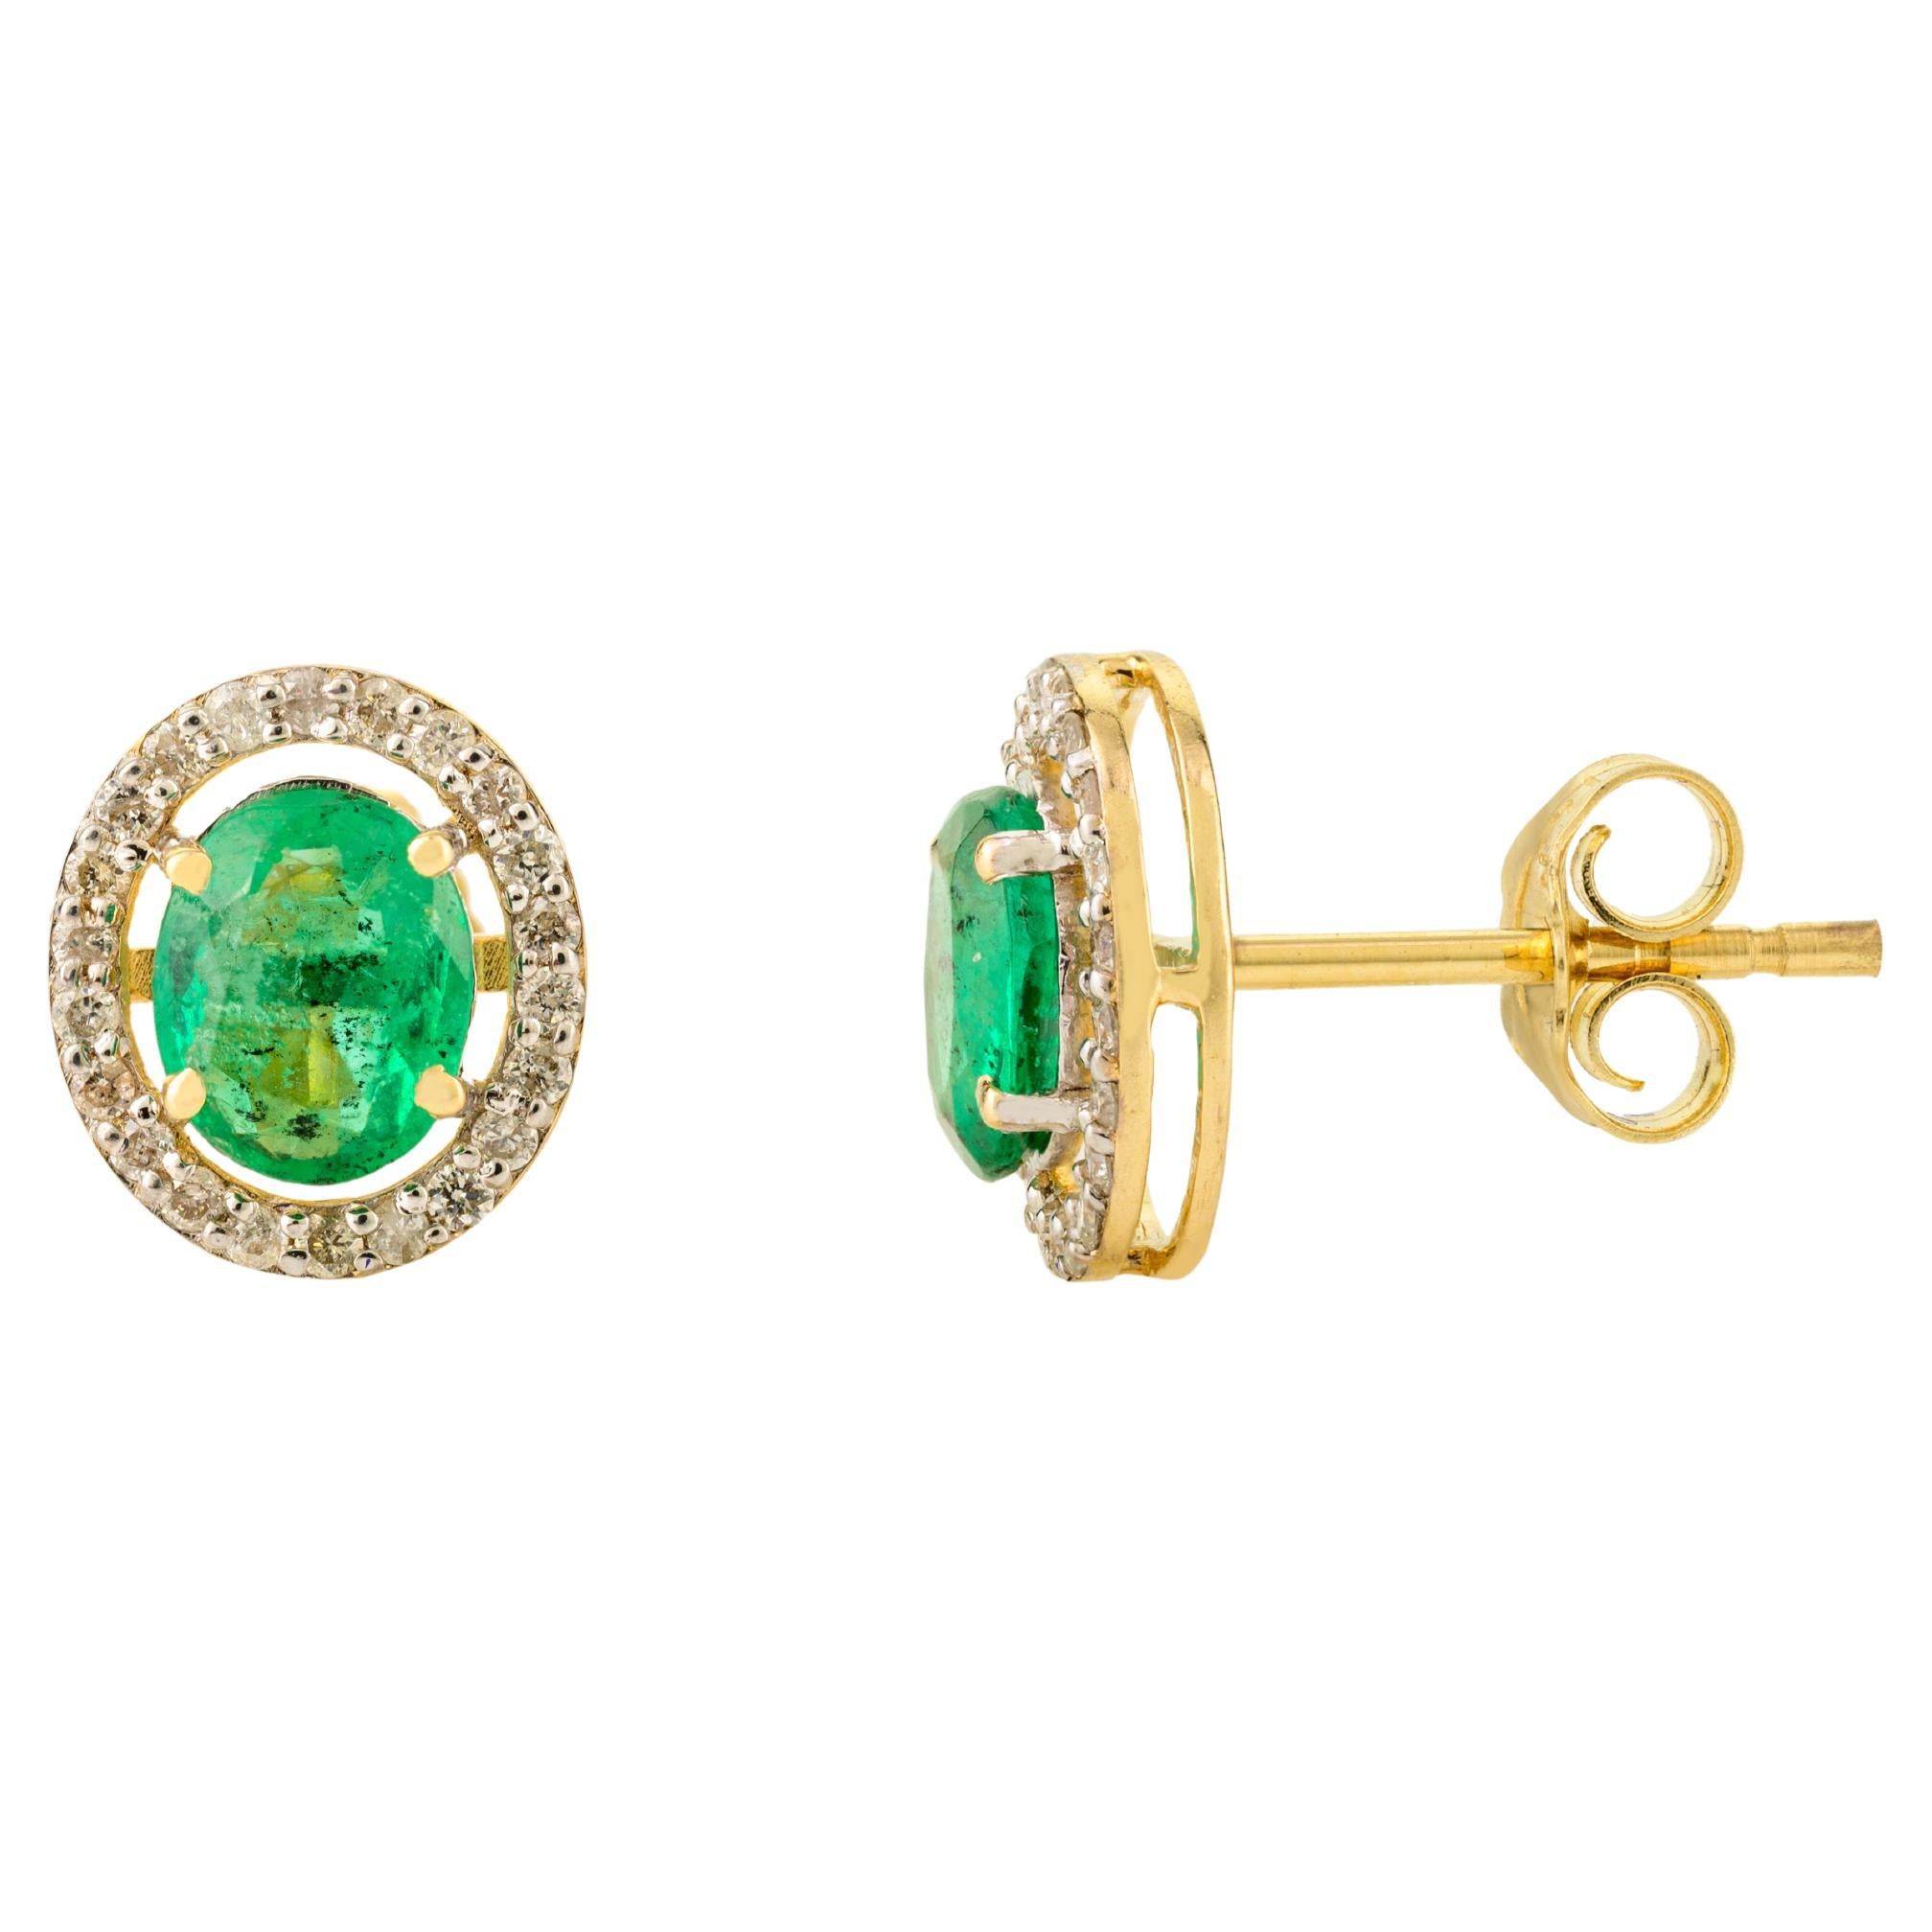 14k Yellow Gold Genuine Emerald Diamond Halo Stud Earrings Gift for Her For Sale